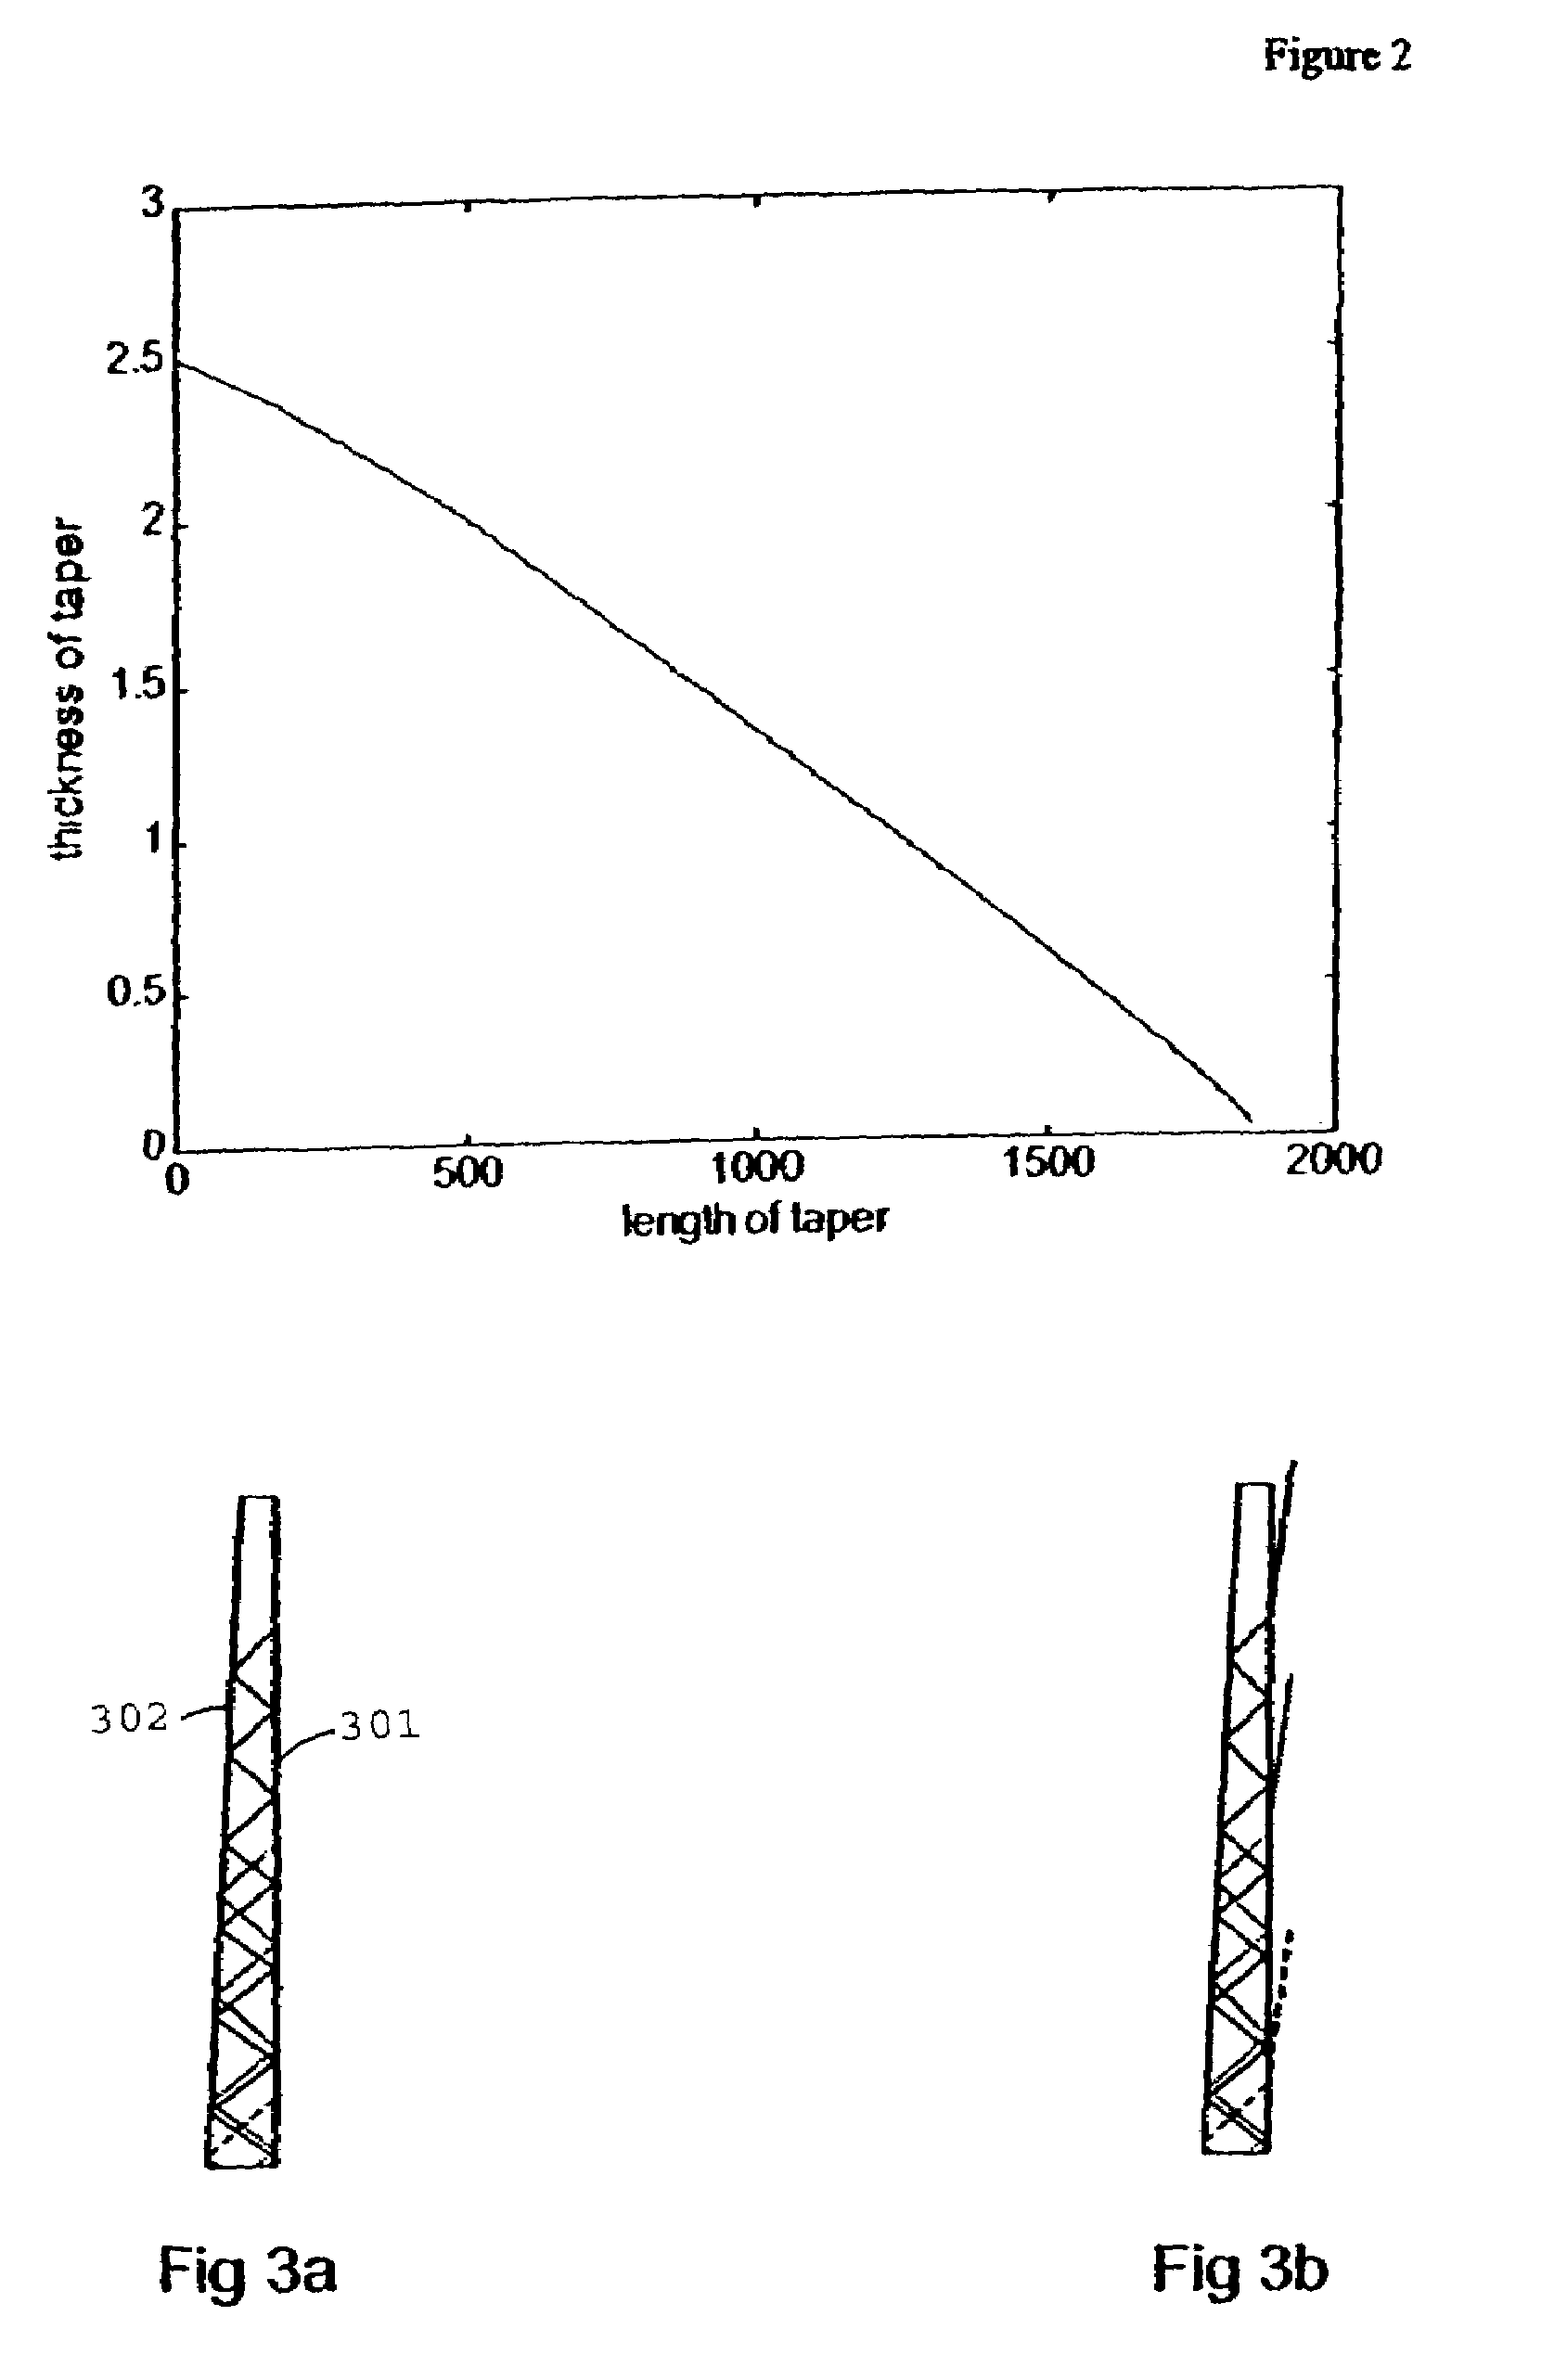 Flat-panel display using tapered waveguide